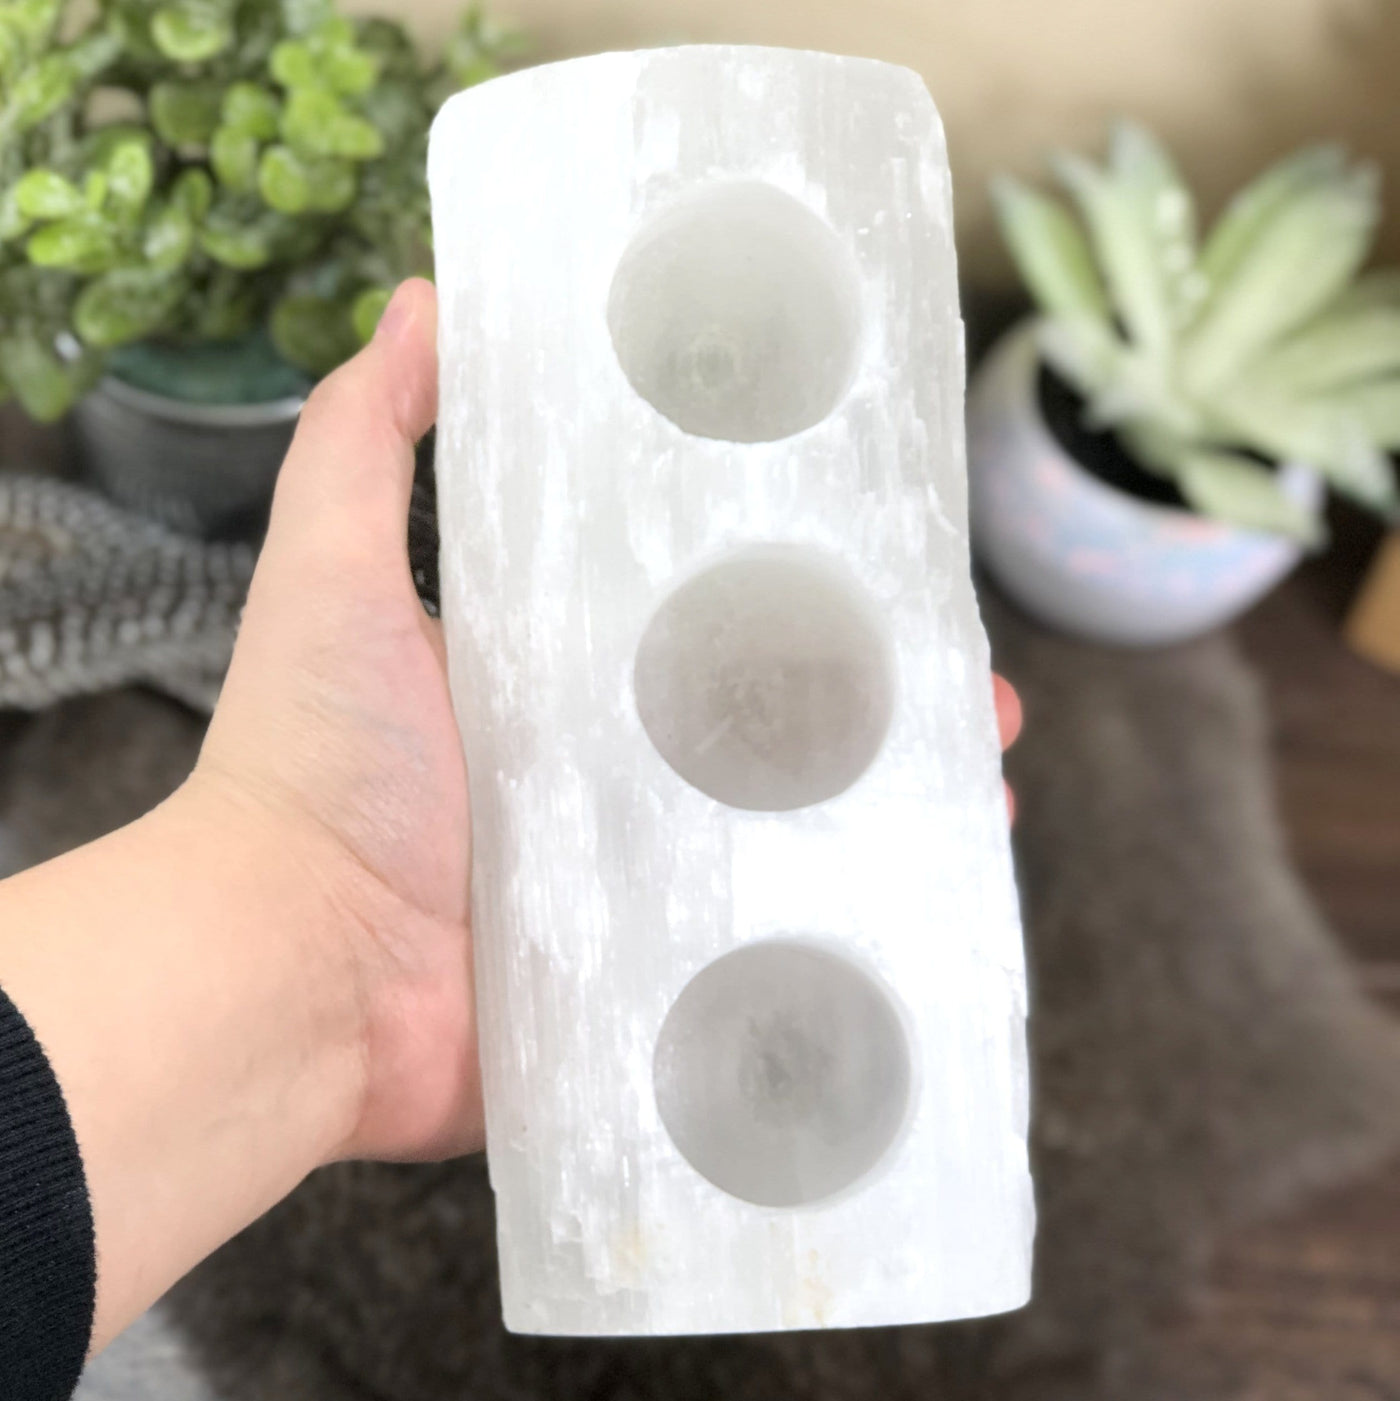 3 votive selenite candle holder in hand for size reference